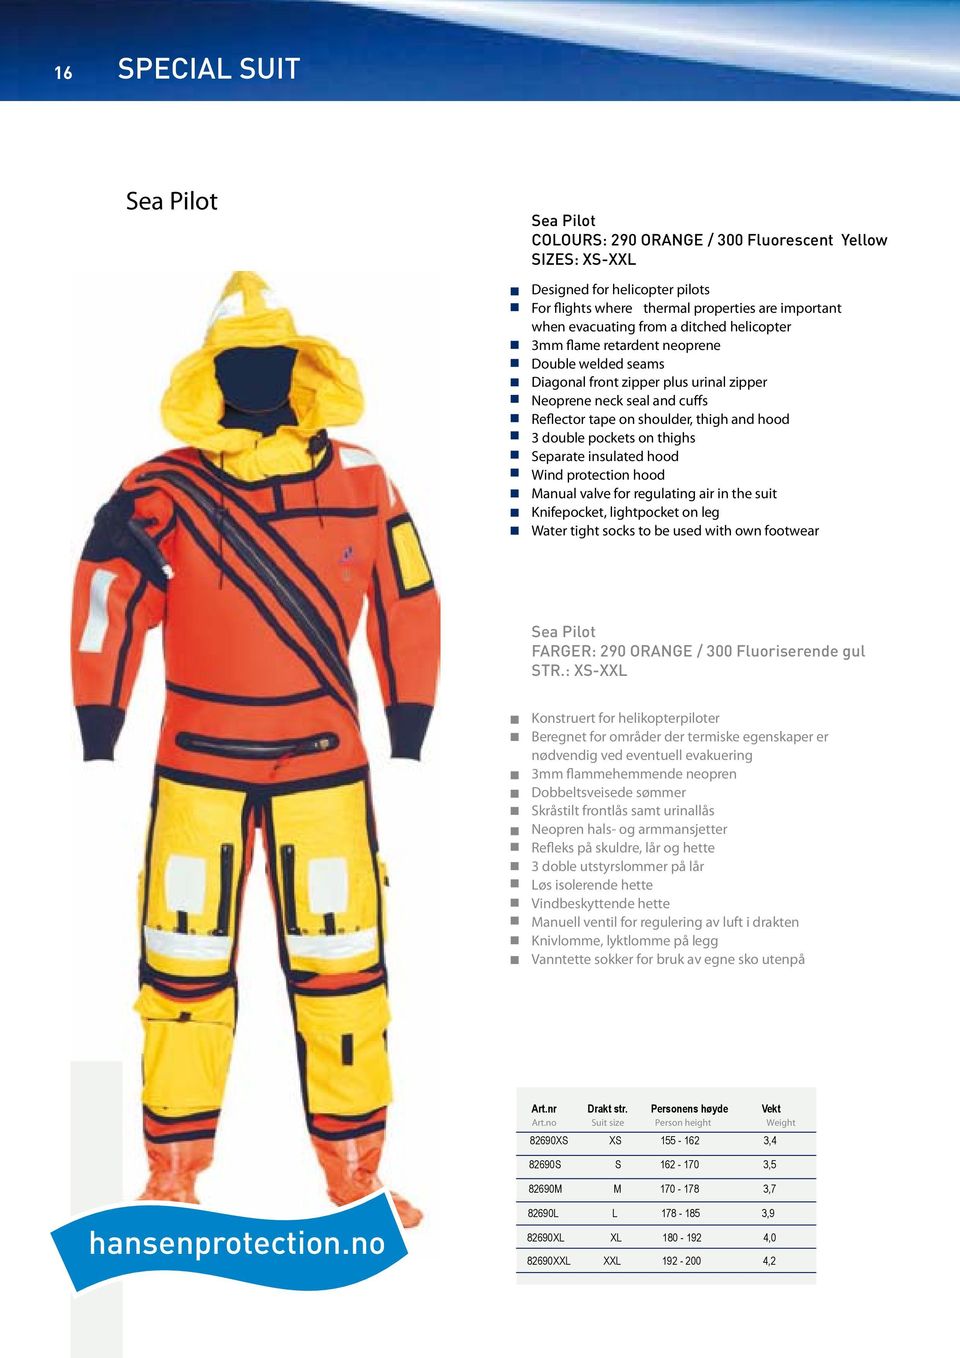 on thighs Separate insulated hood Wind protection hood Manual valve for regulating air in the suit Knifepocket, lightpocket on leg Water tight socks to be used with own footwear Sea Pilot FARGER: 290